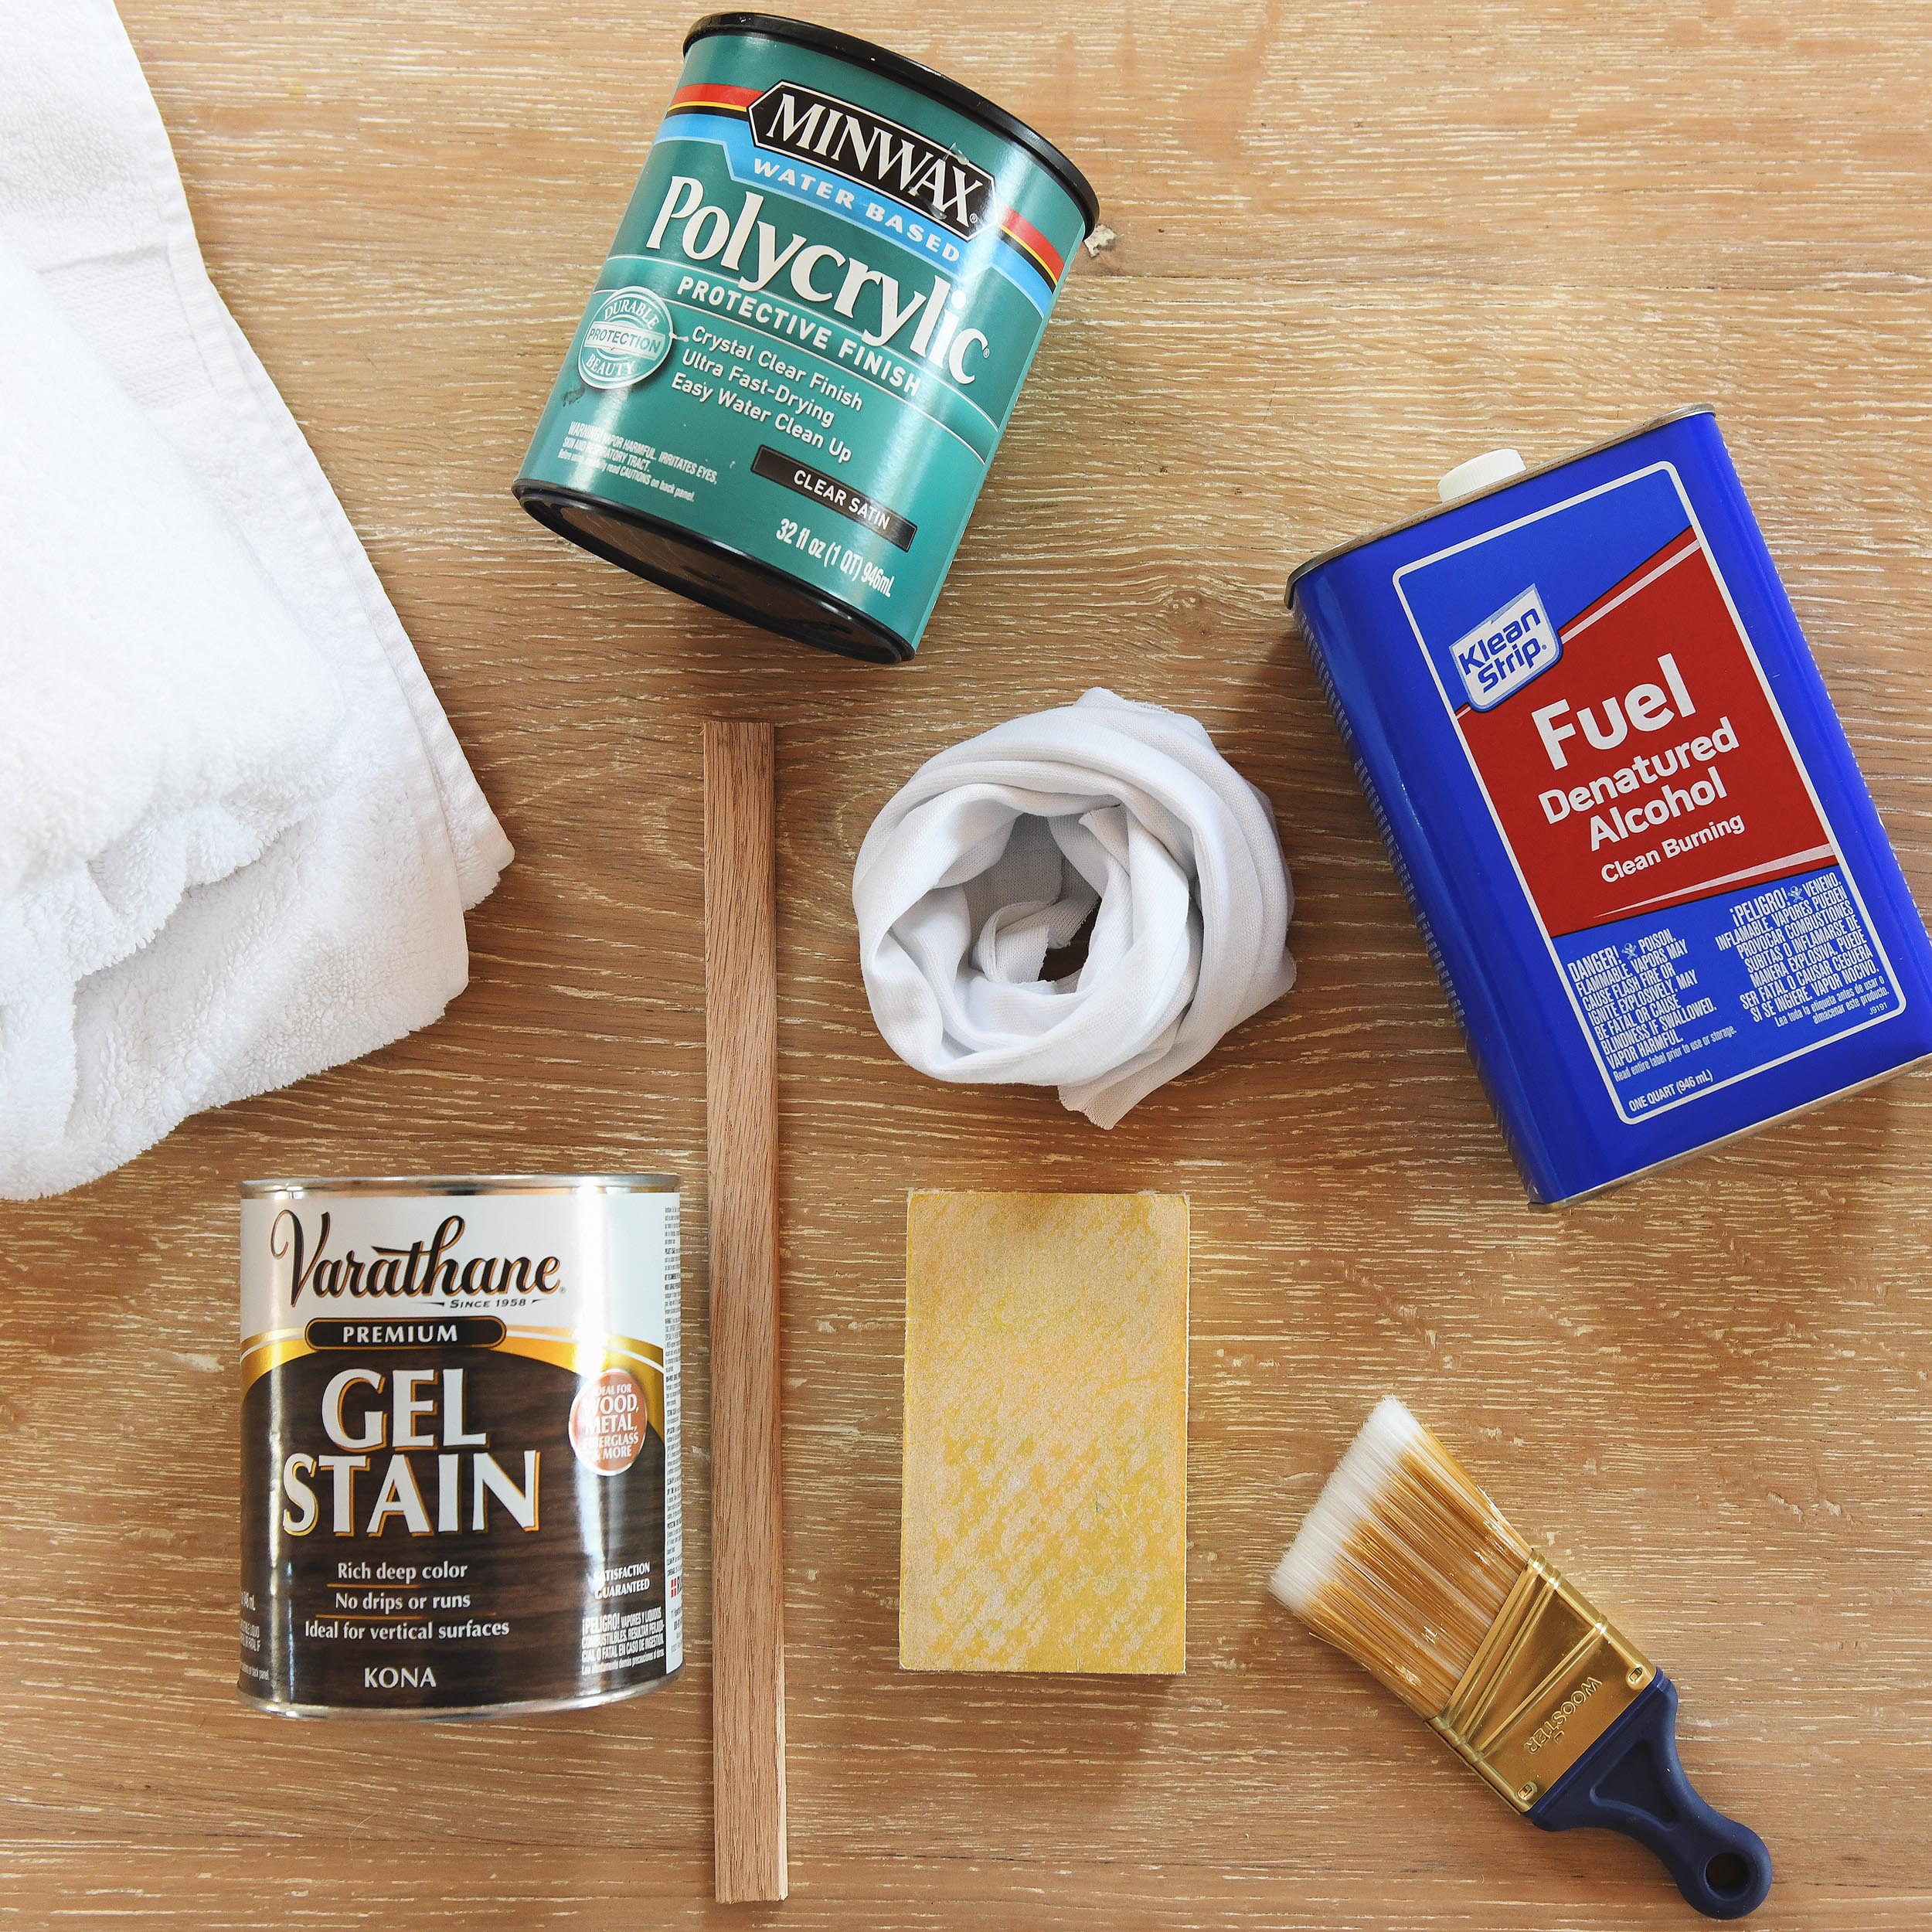 Supplies needed for a gel stain project | how to gel stain furniture, tutorial by Yellow Brick Home